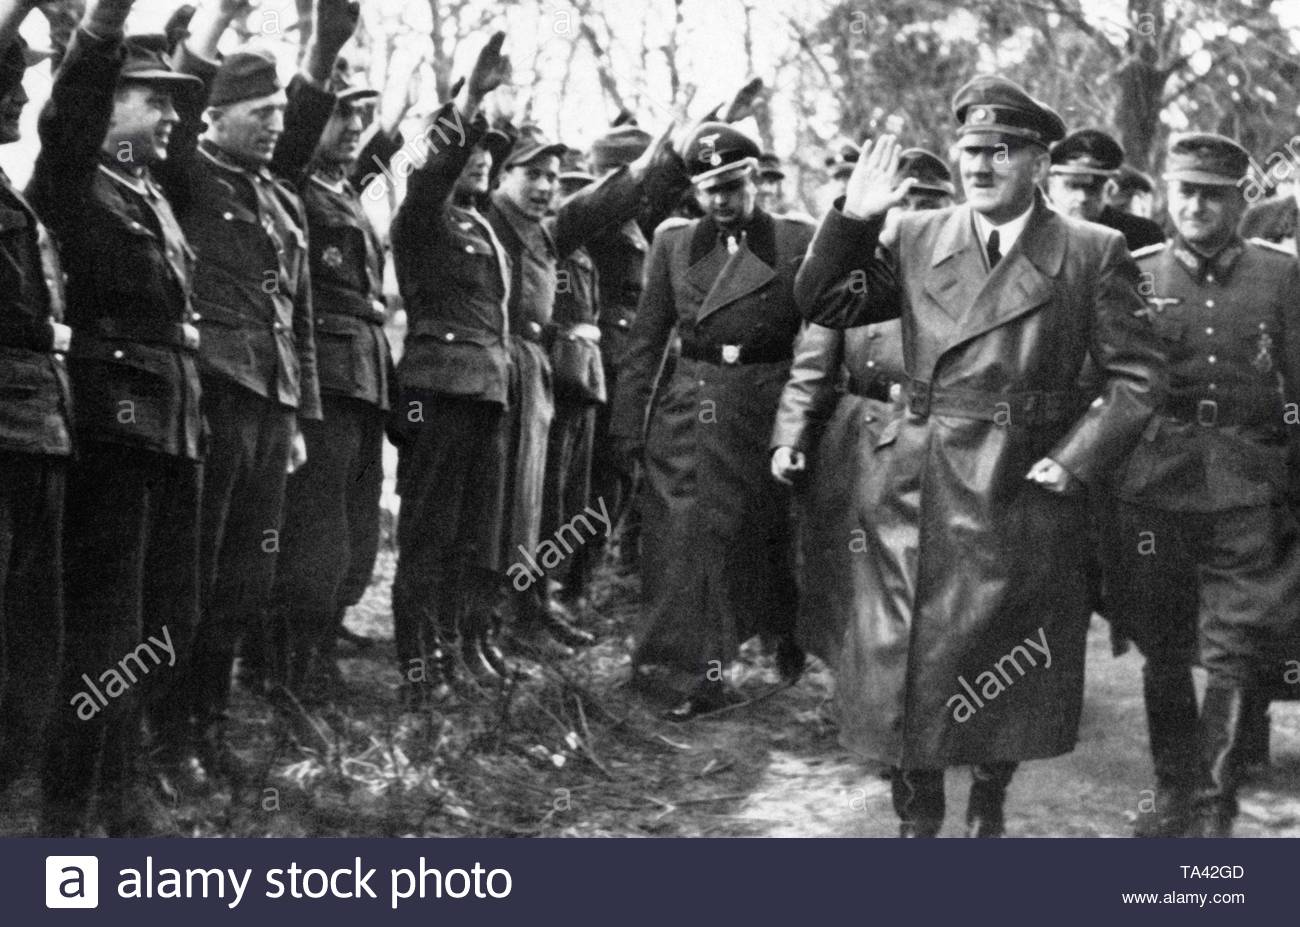 Soldiers greet Adolf Hitler with the Nazi salute during his last front  visit to the Oder front in March 1945 Stock Photo - Alamy